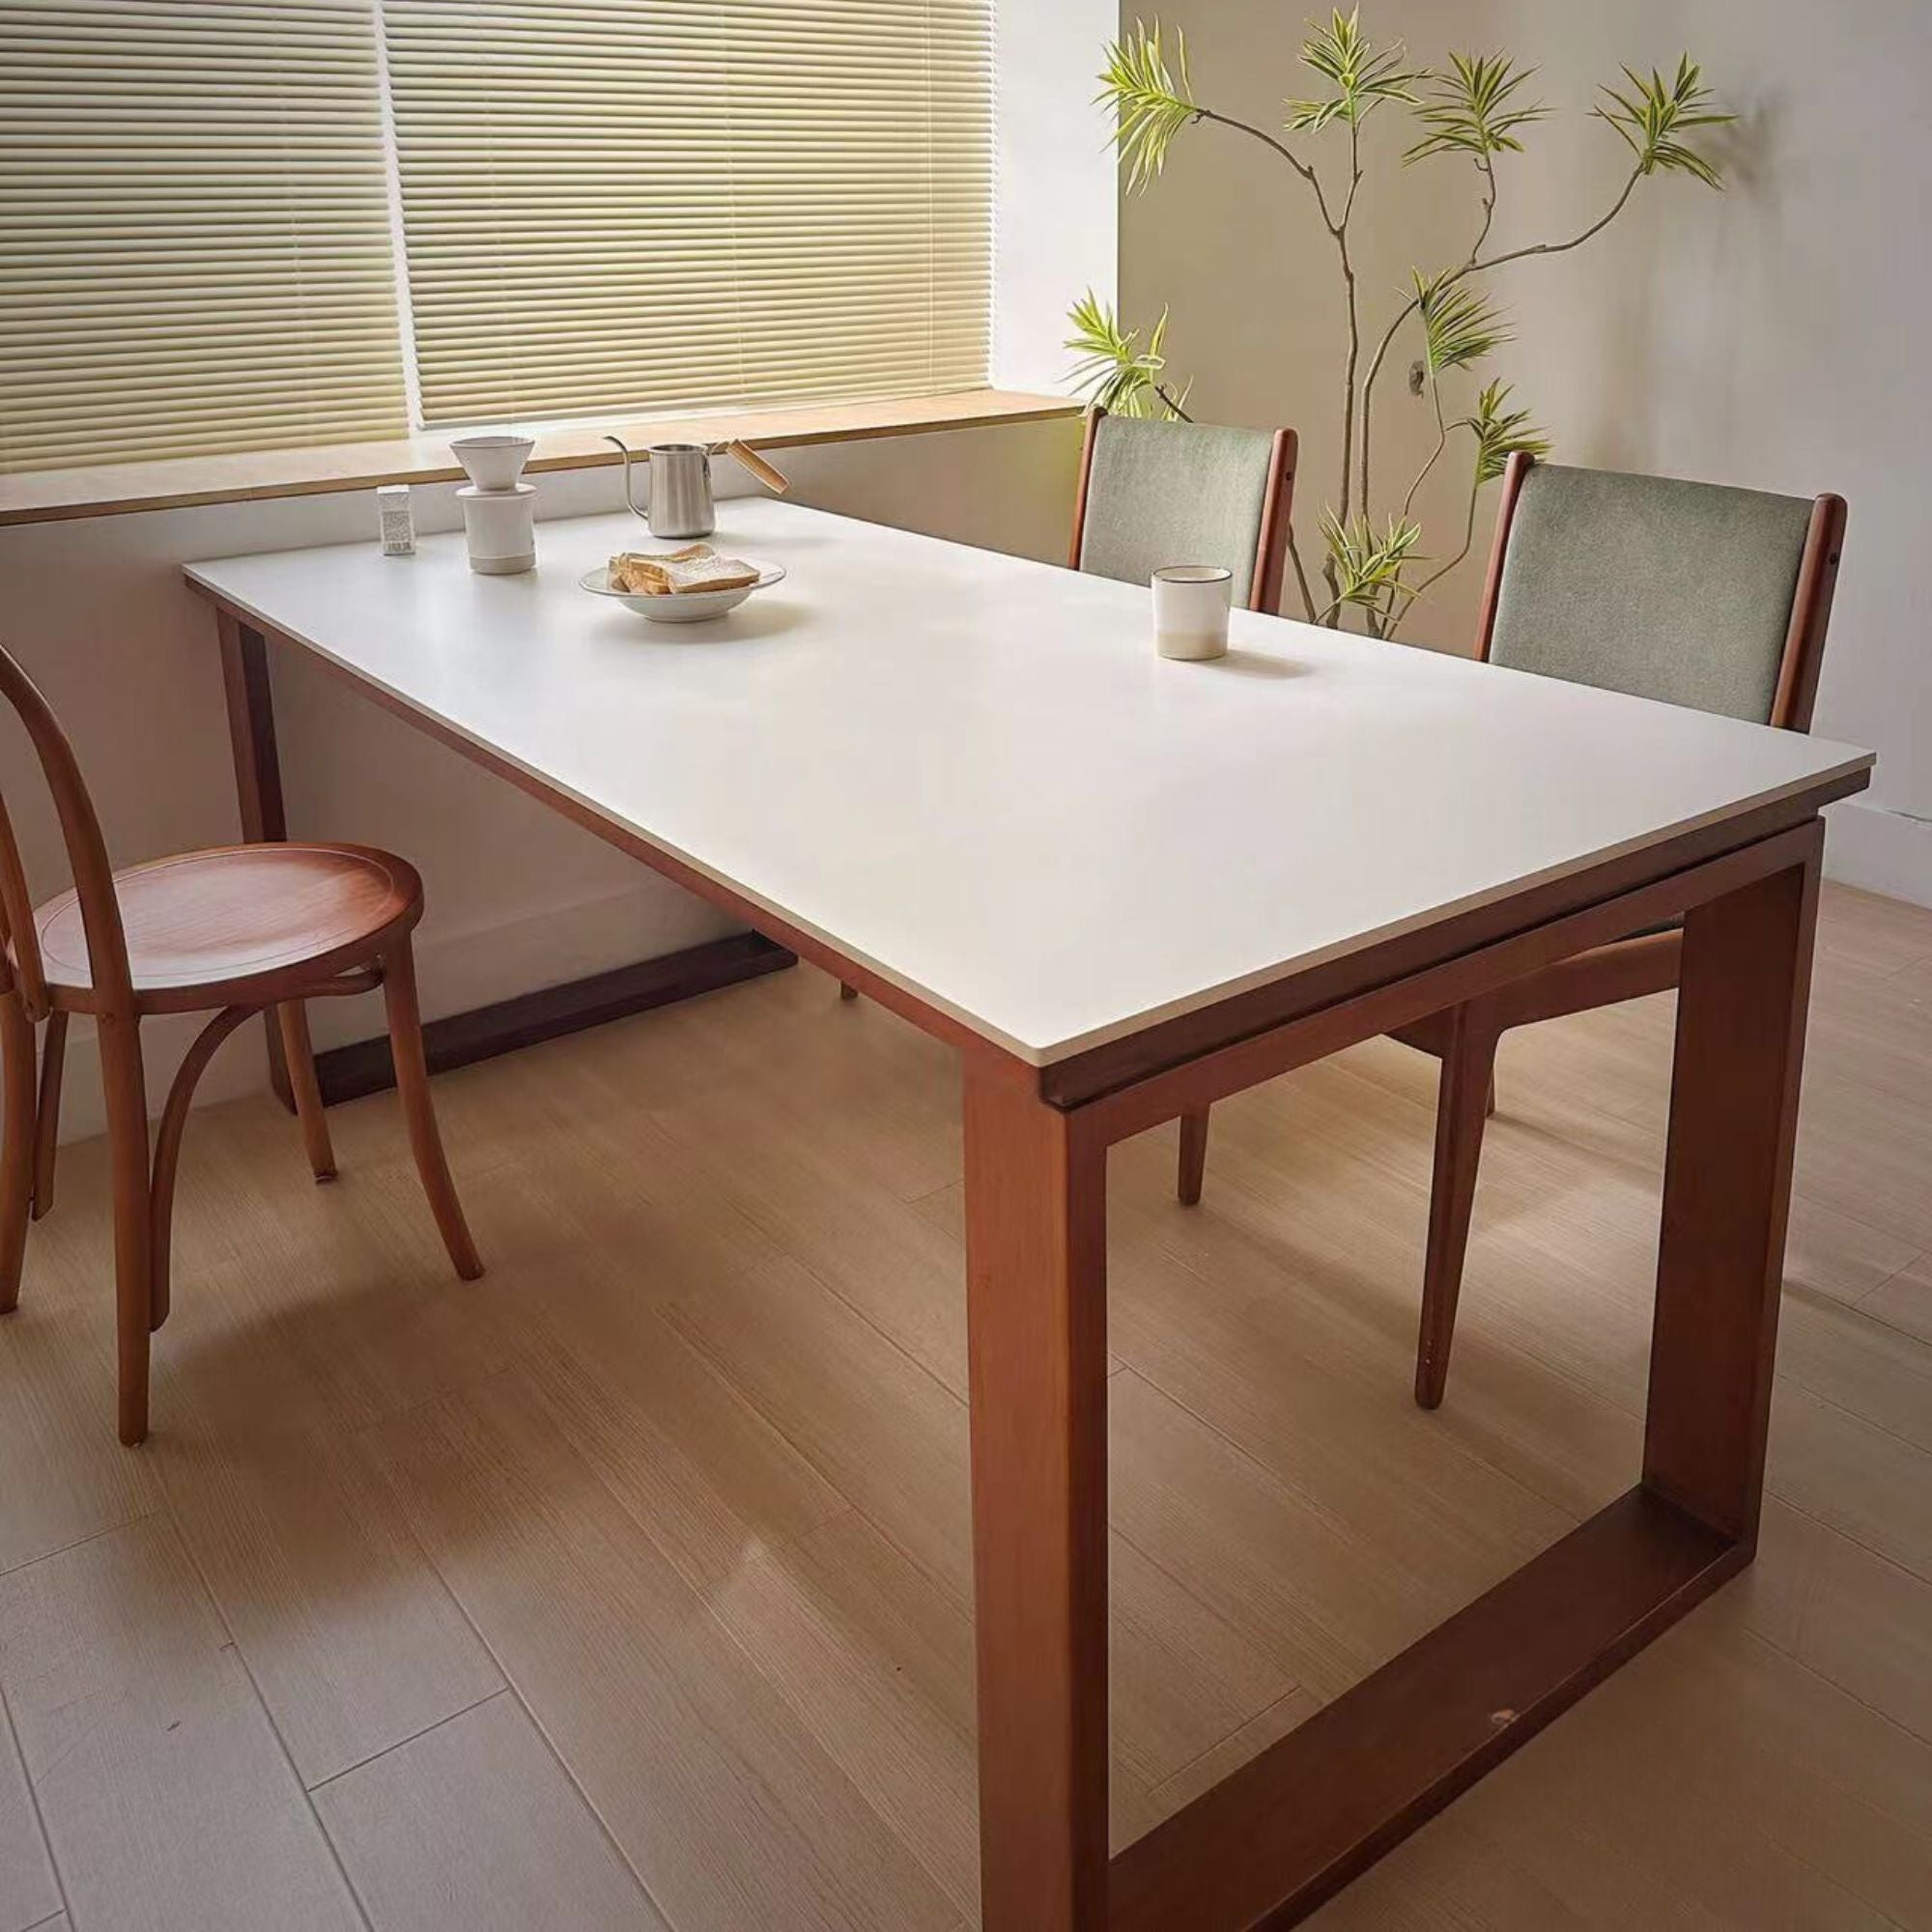 Tanner sintered stone dining table set